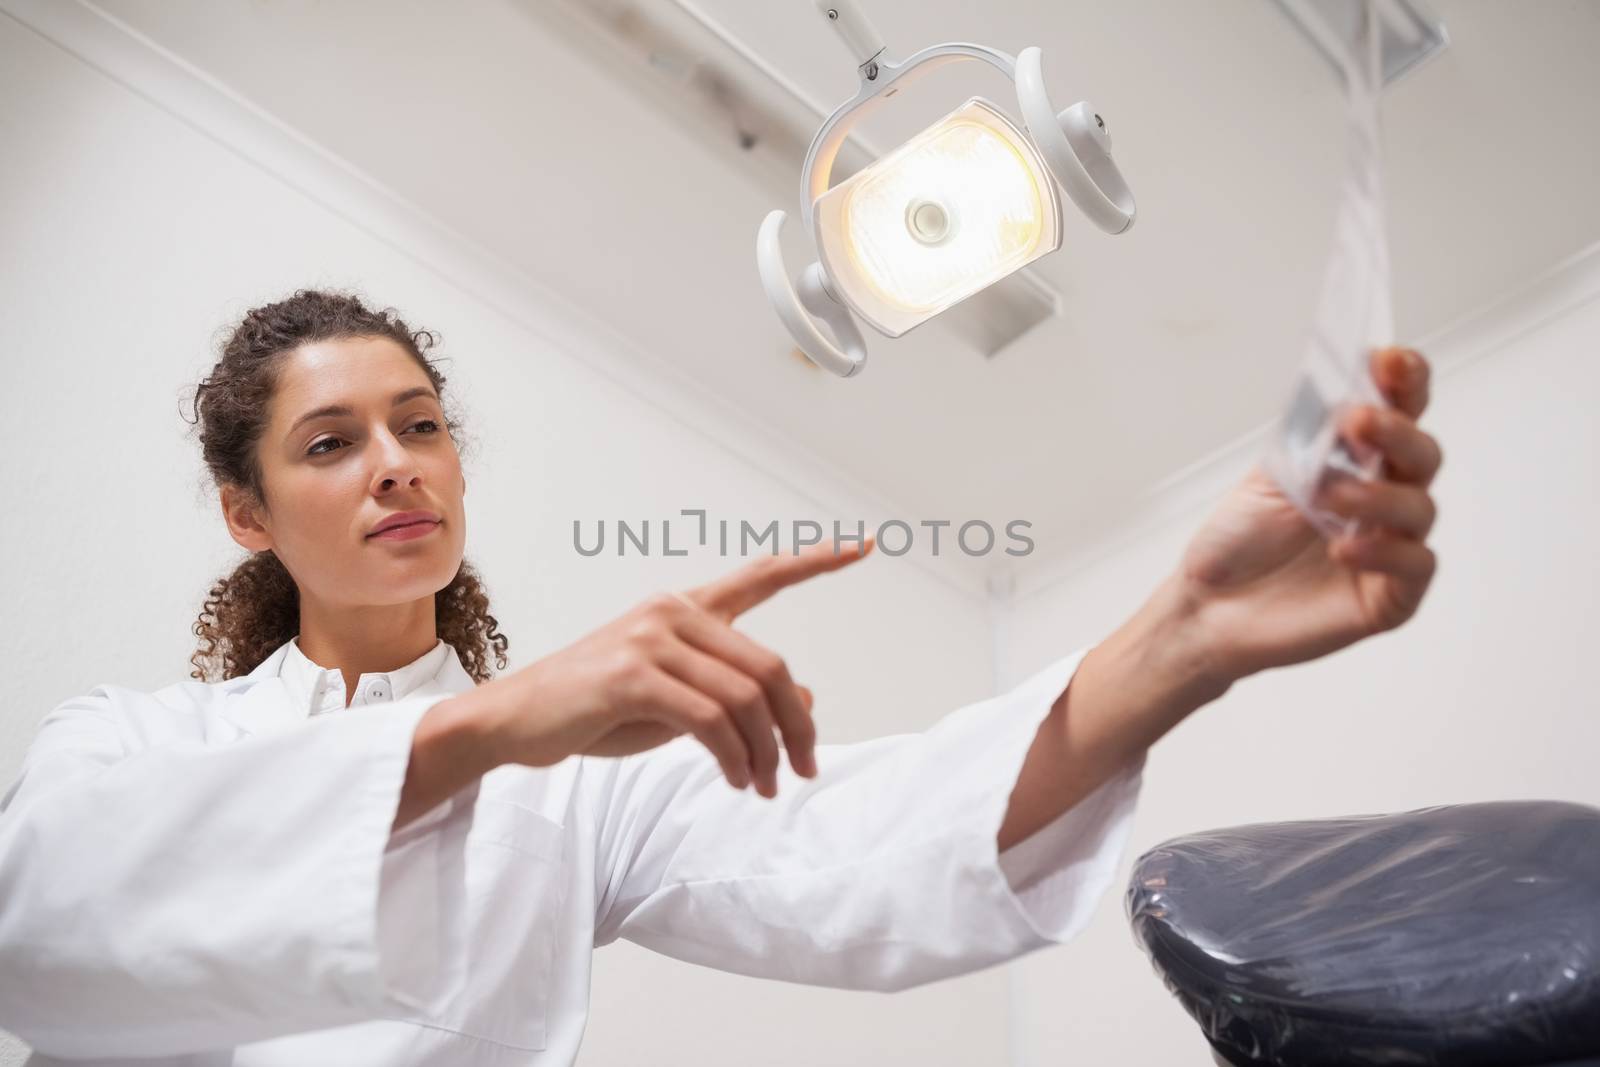 Dentist examining xrays and pointing to them at the dental clinic